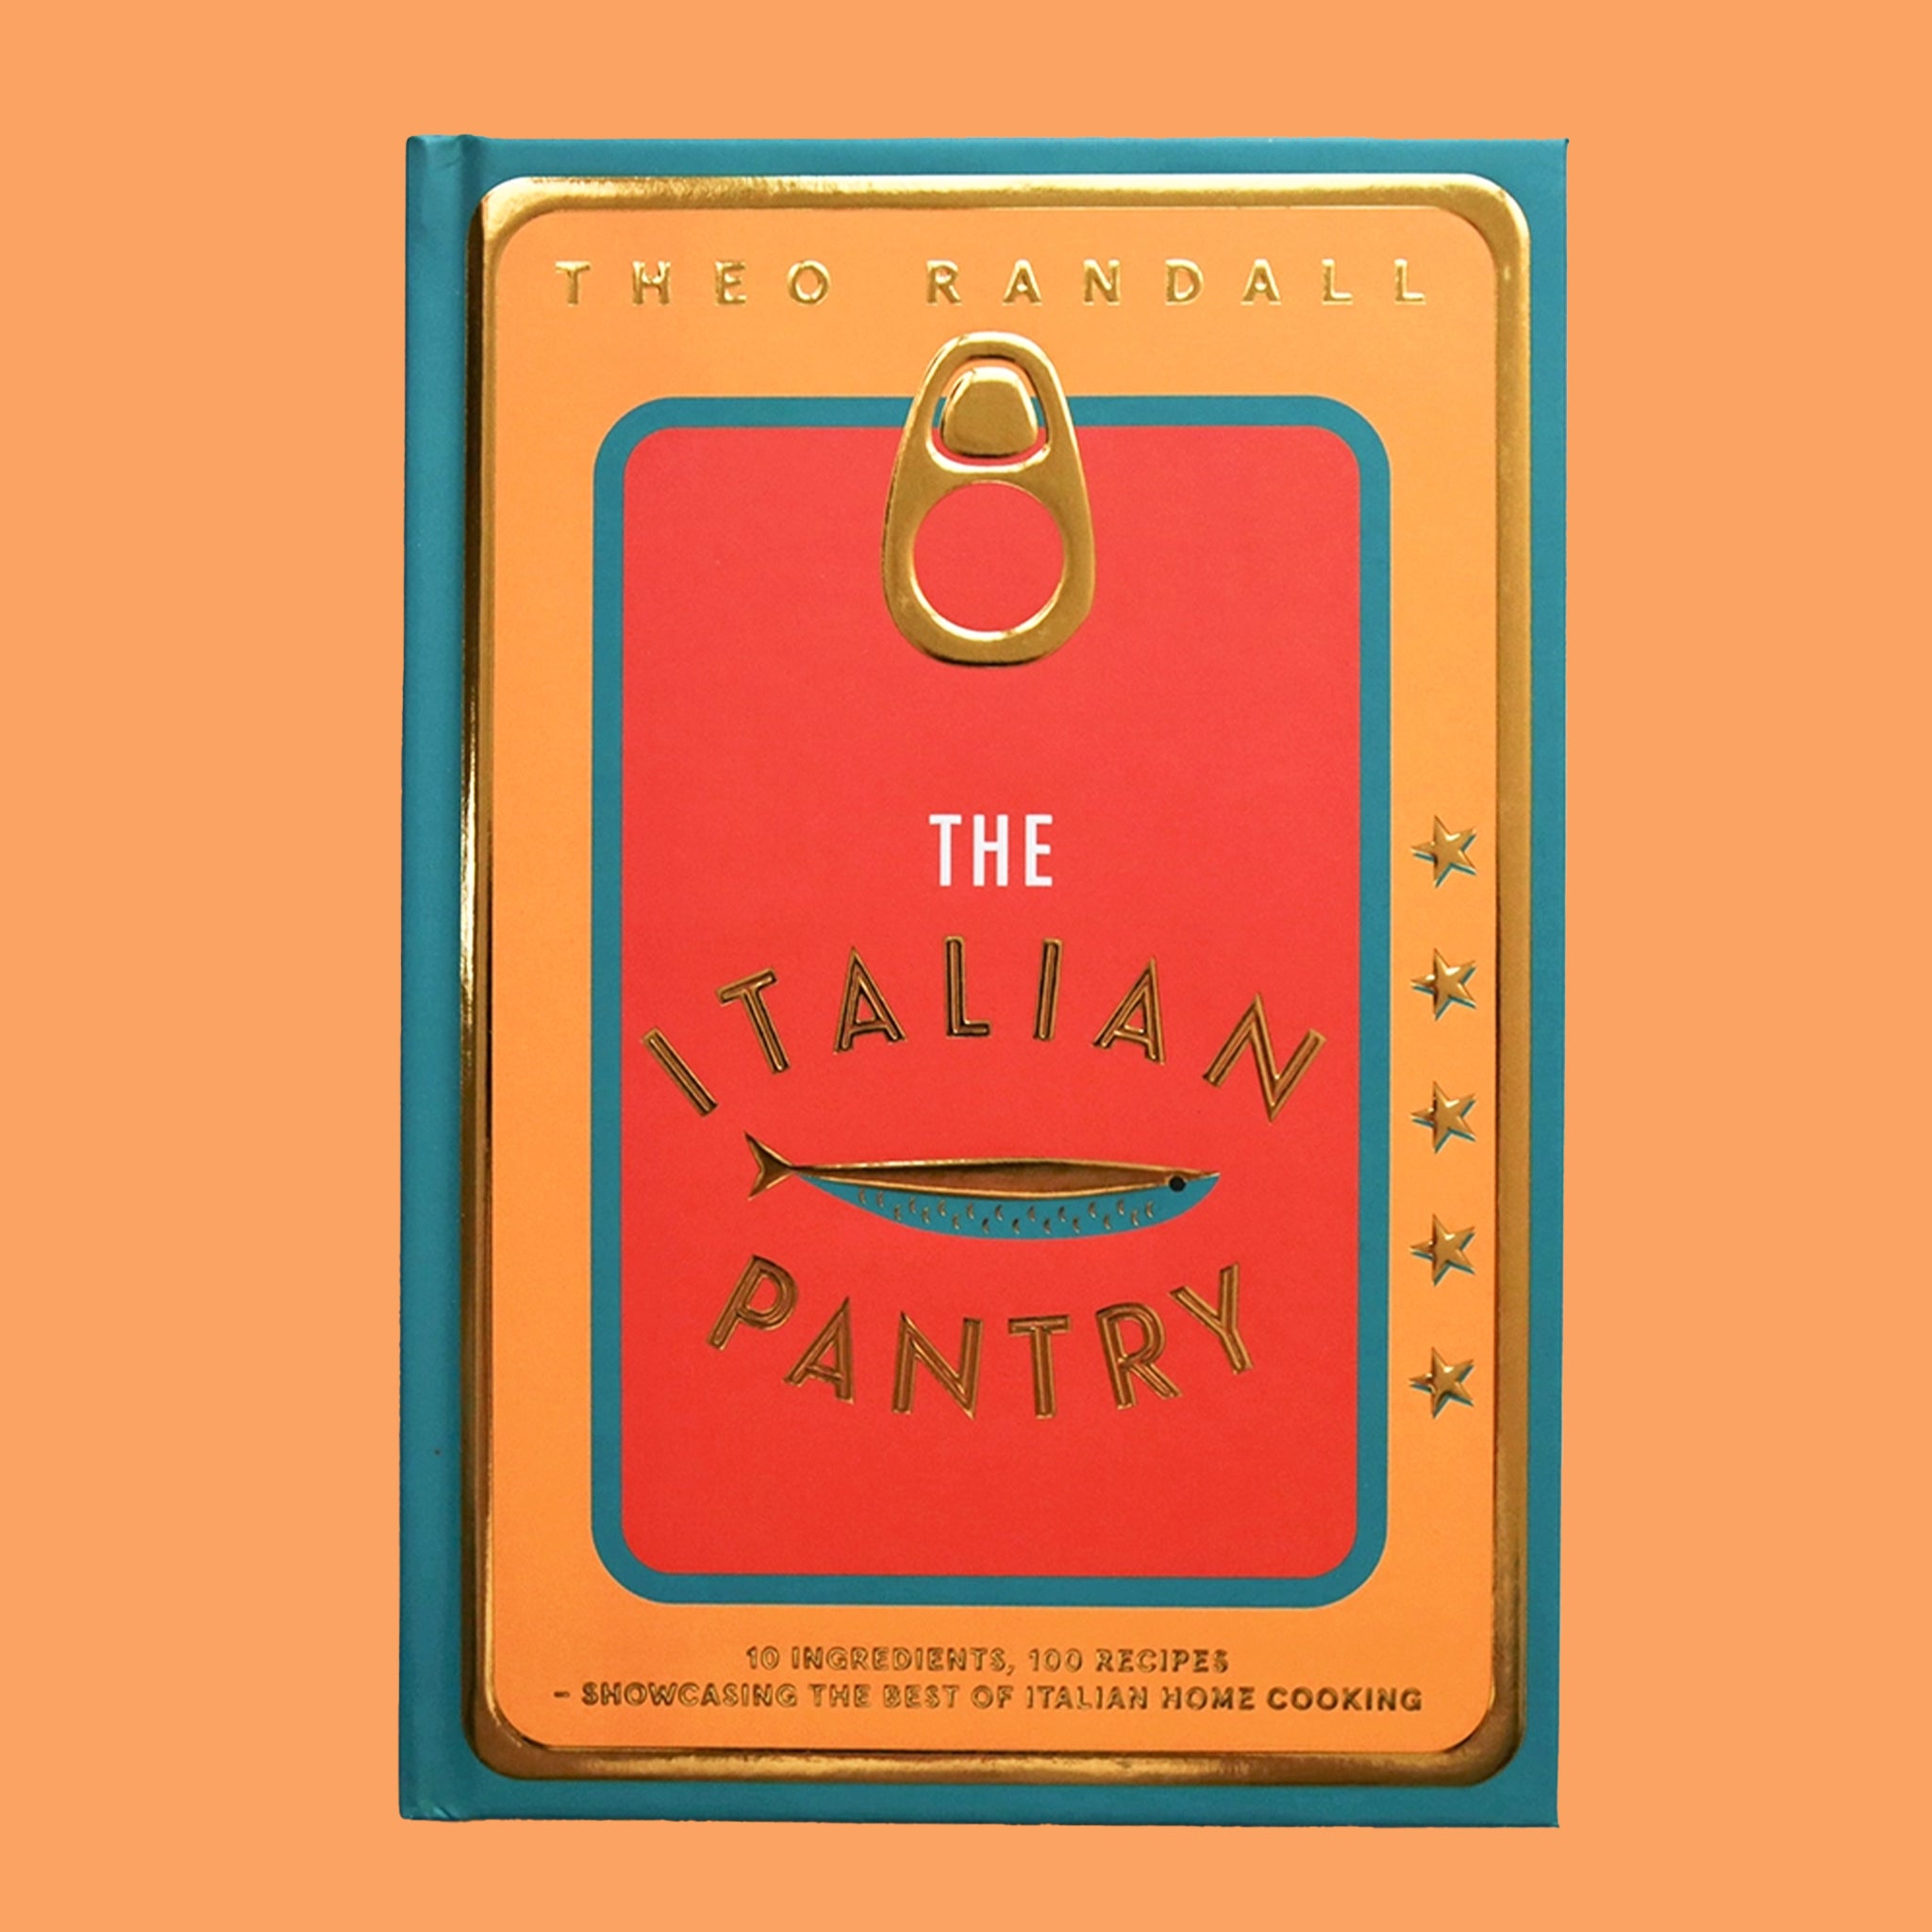 A vibrant book cover made to look like the top of a tin fish container with a teal blue border, an orange layer and then a red center along with the title, &quot;The Italian Pantry&quot;.